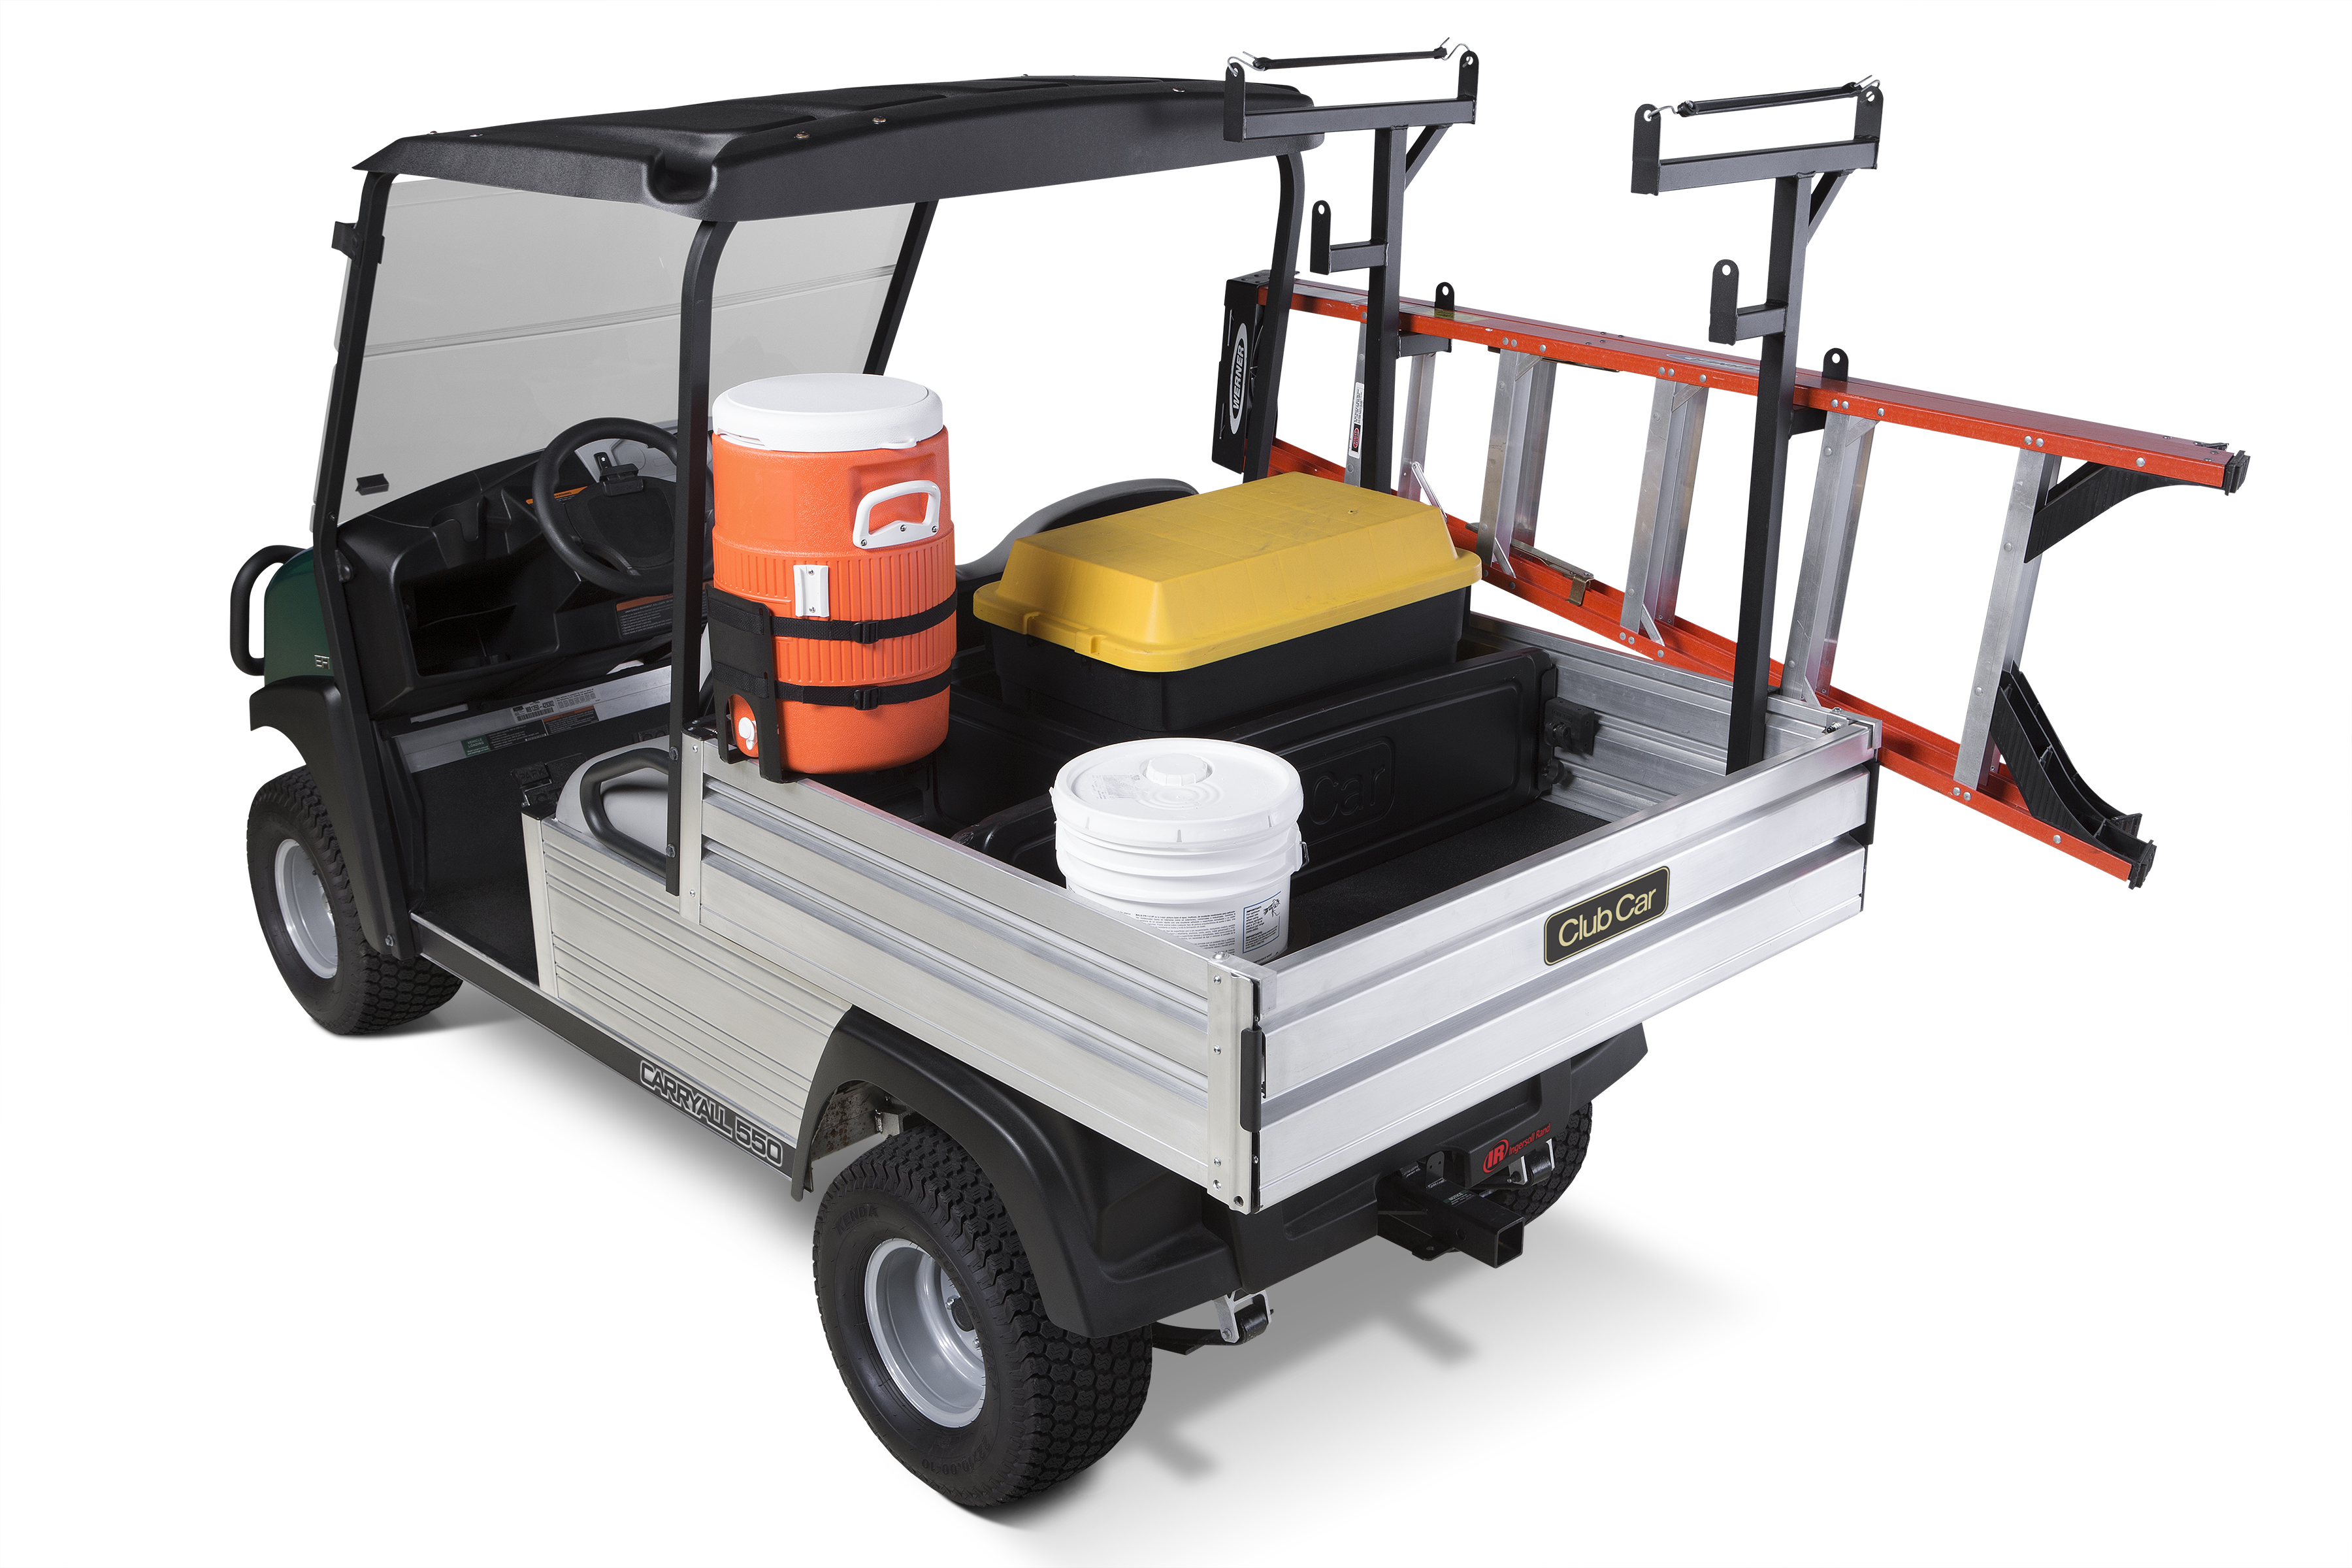 Club Car Carryall utility vehicles accommodate the new VersAttach bed-based attachment system that frees bed space for fewer round trips.